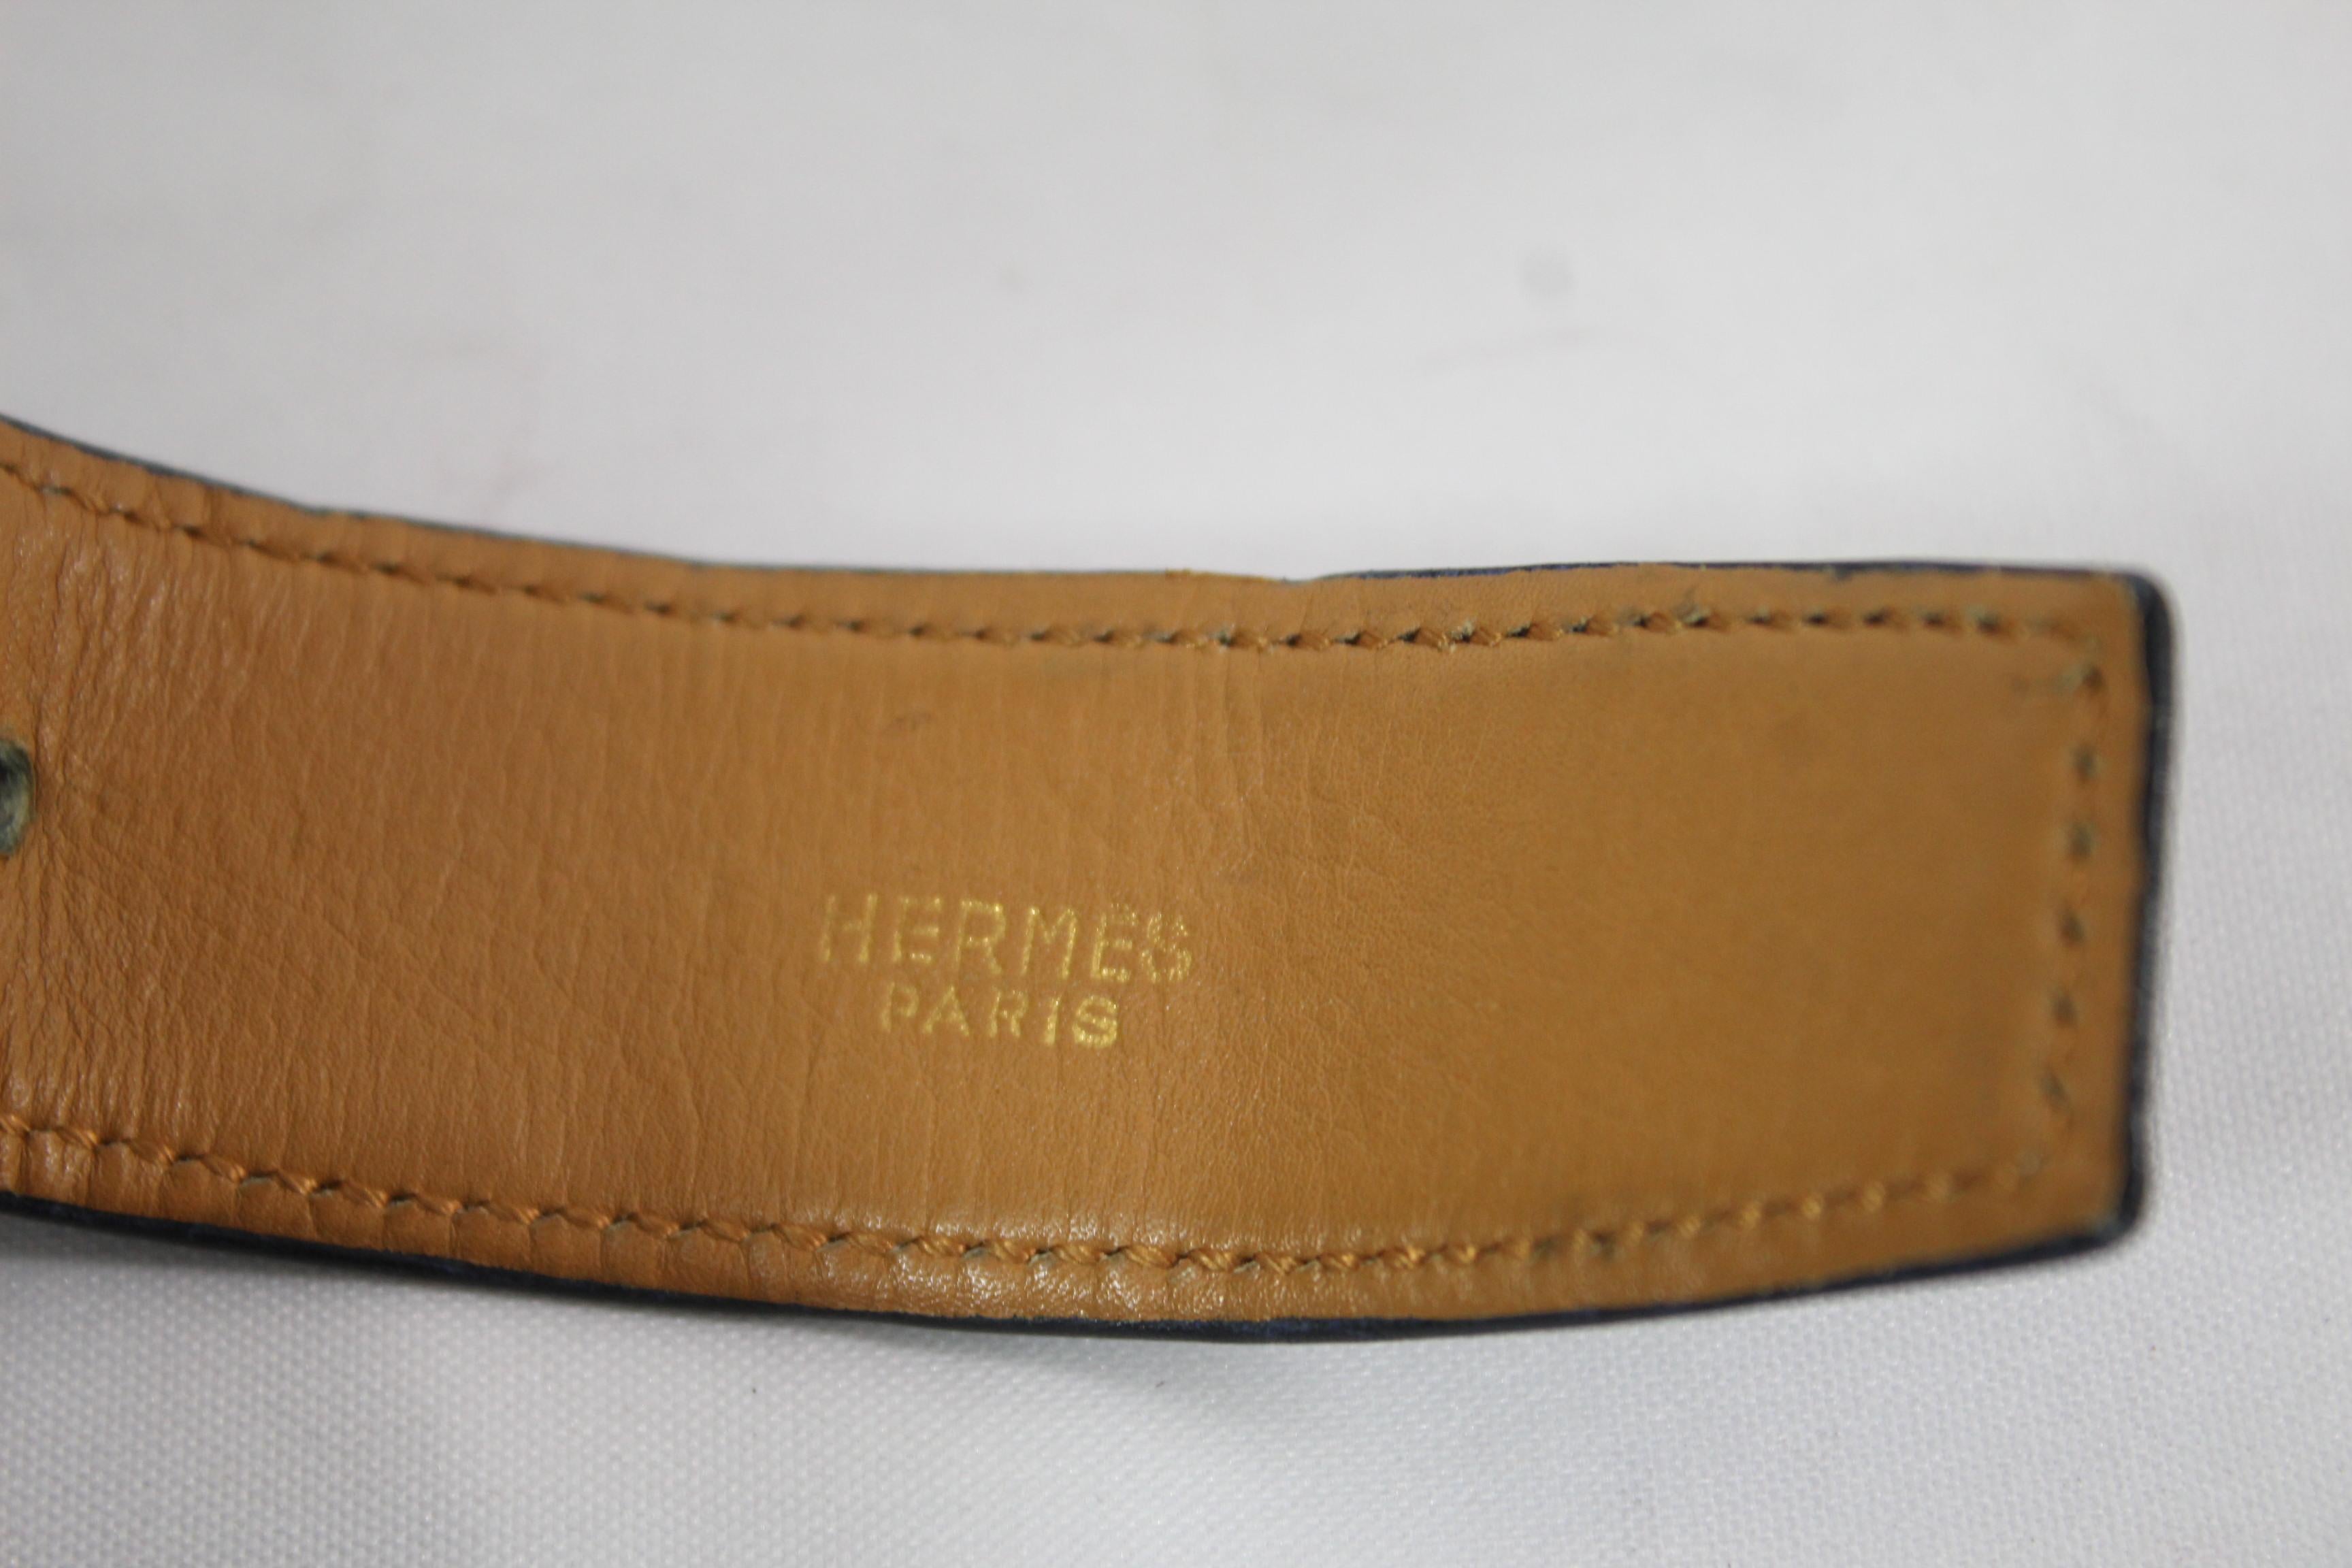 Hermes Vintage Bambou belt in navy box leather. good vintage condition some light signs of wear in the buckle. Size FR 75